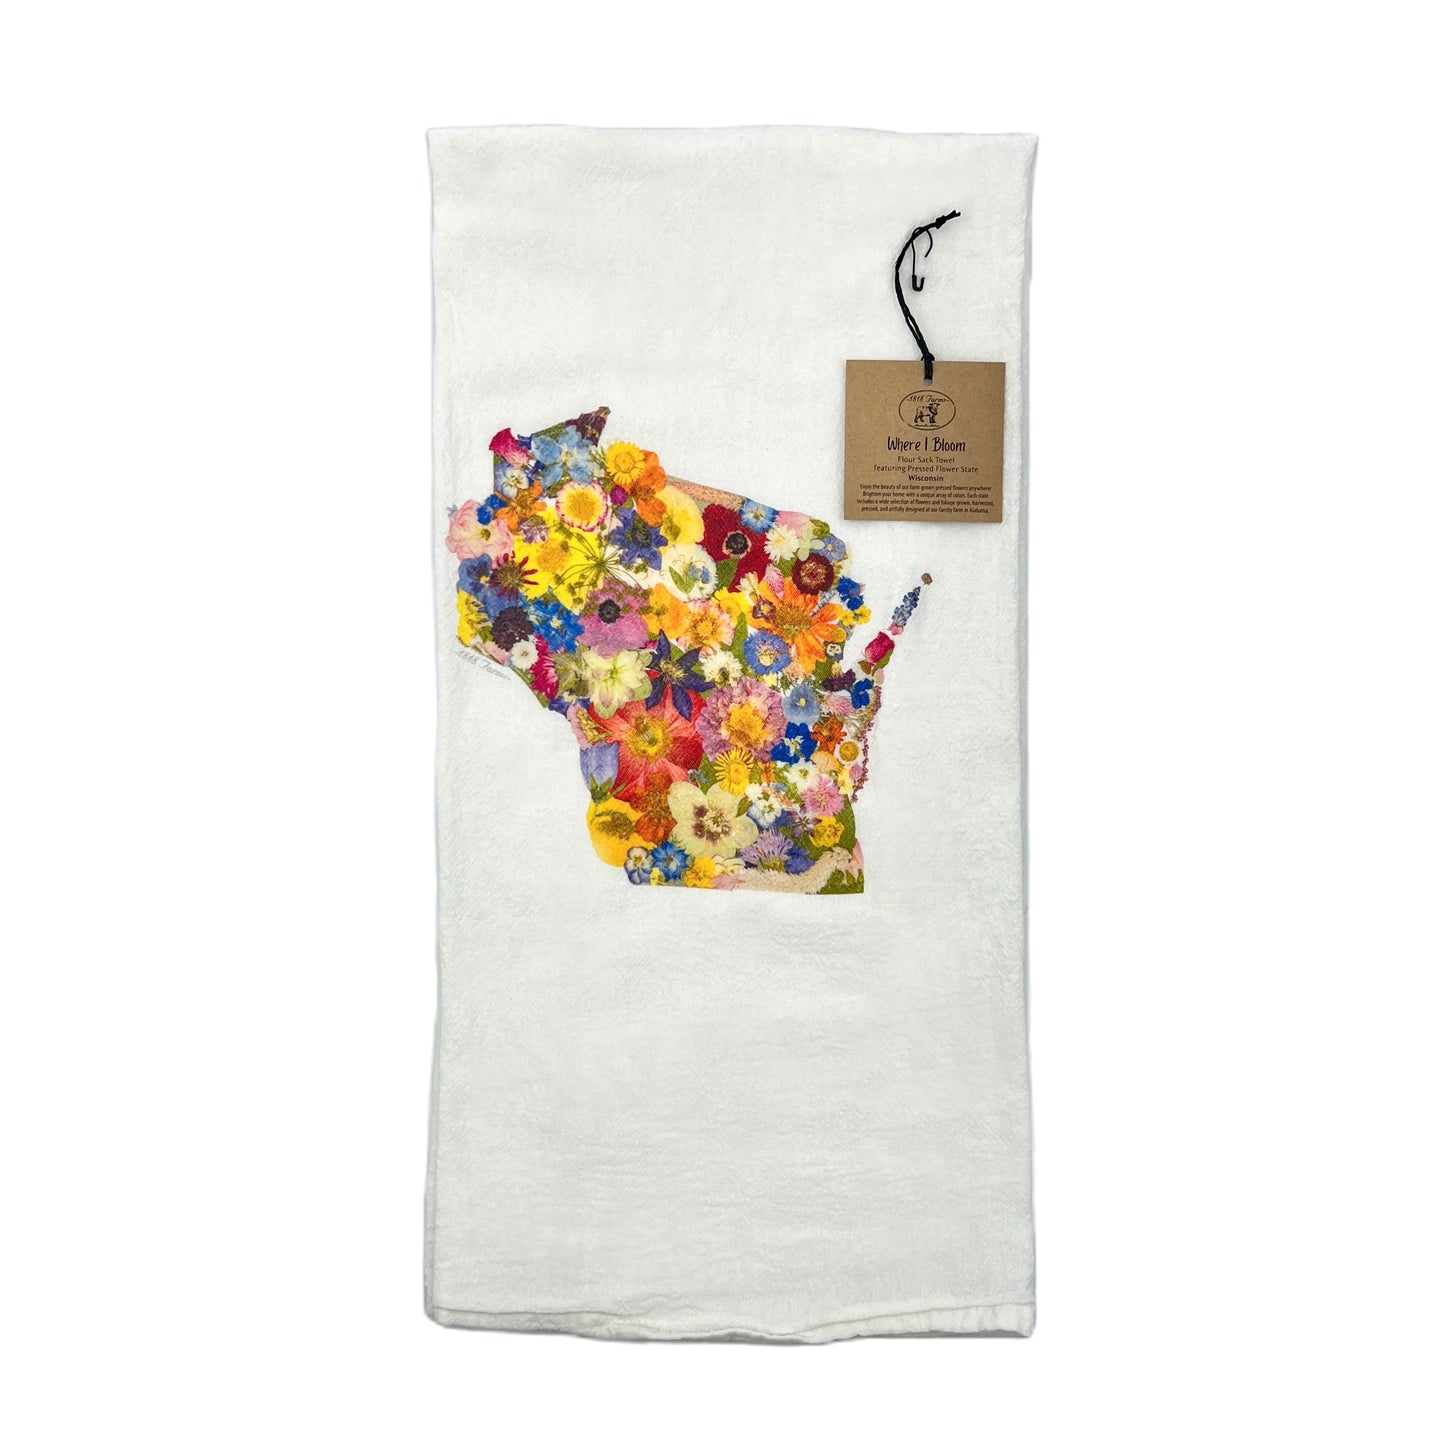 State Themed Flour Sack Towel  - "Where I Bloom" Collection Towel 1818 Farms Wisconsin  